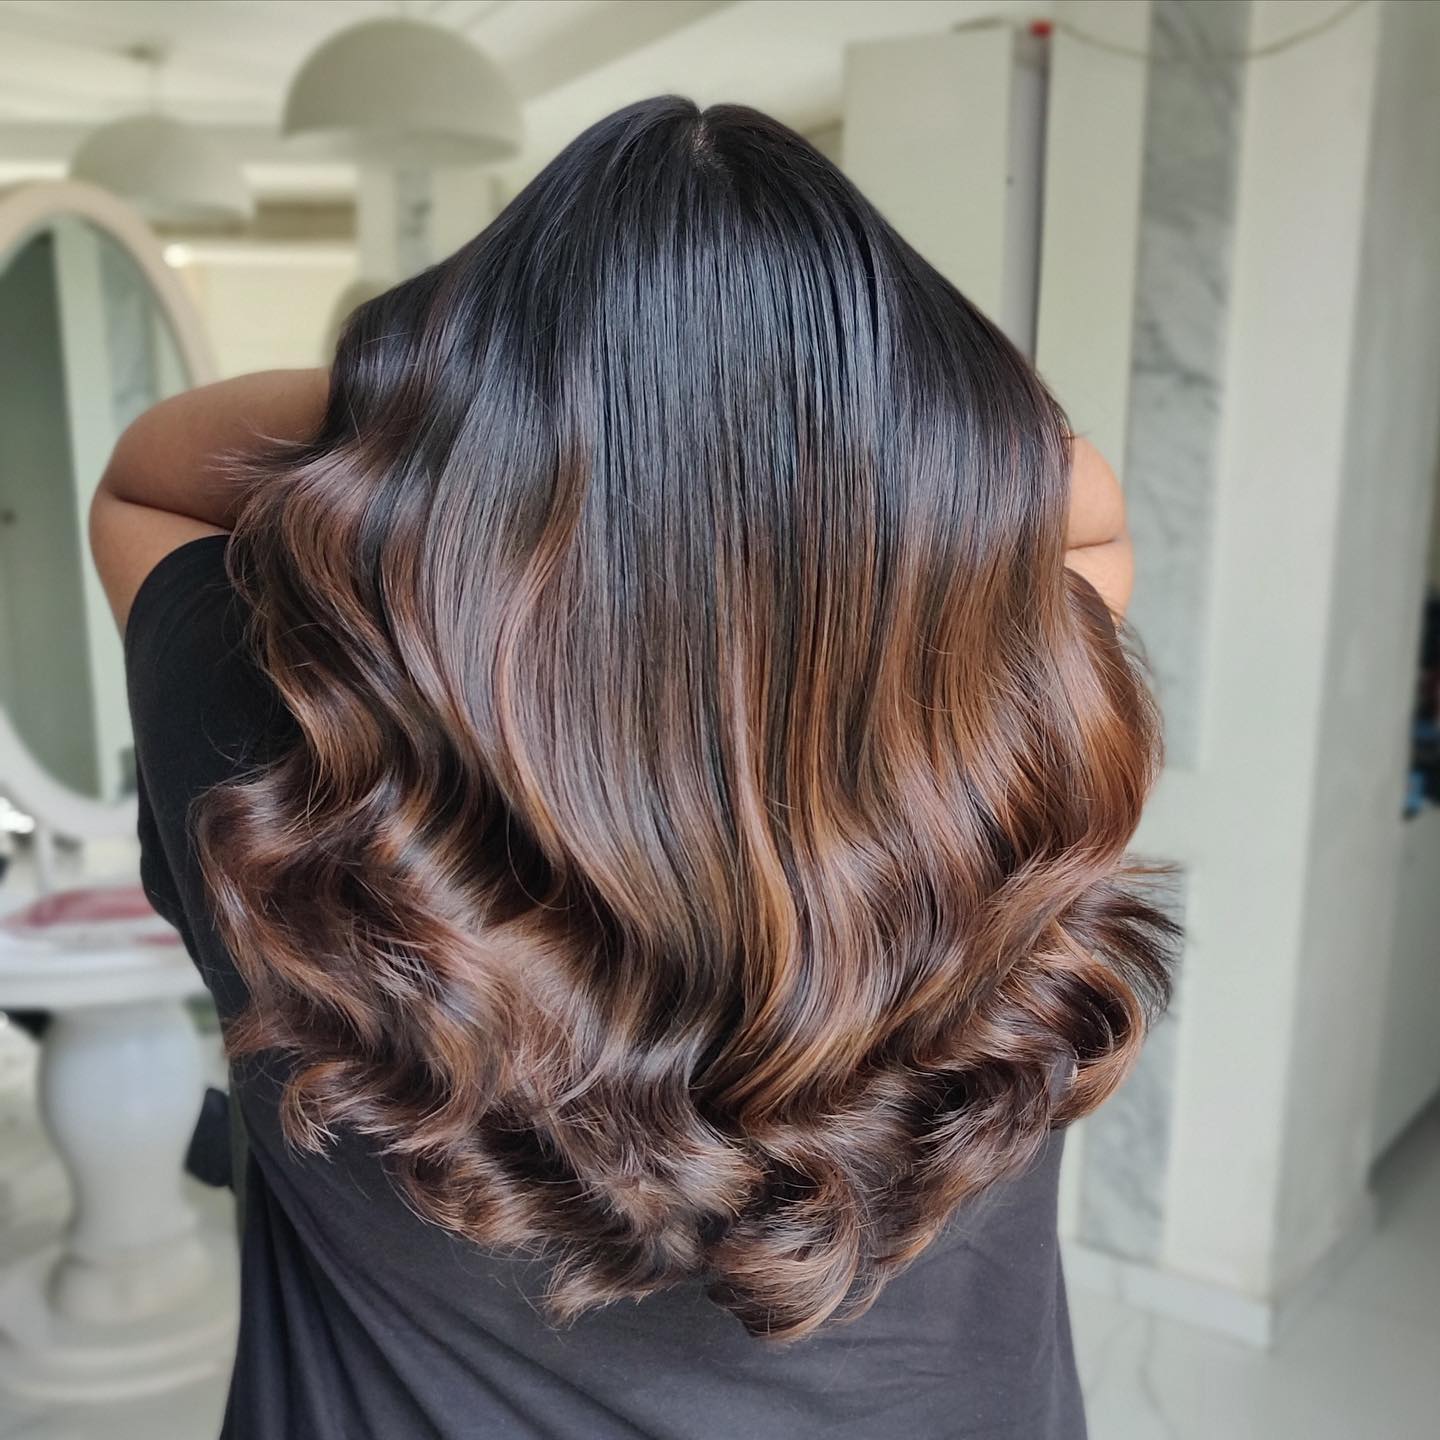 Chestnut Brown Ombre on Long Wavy Hair